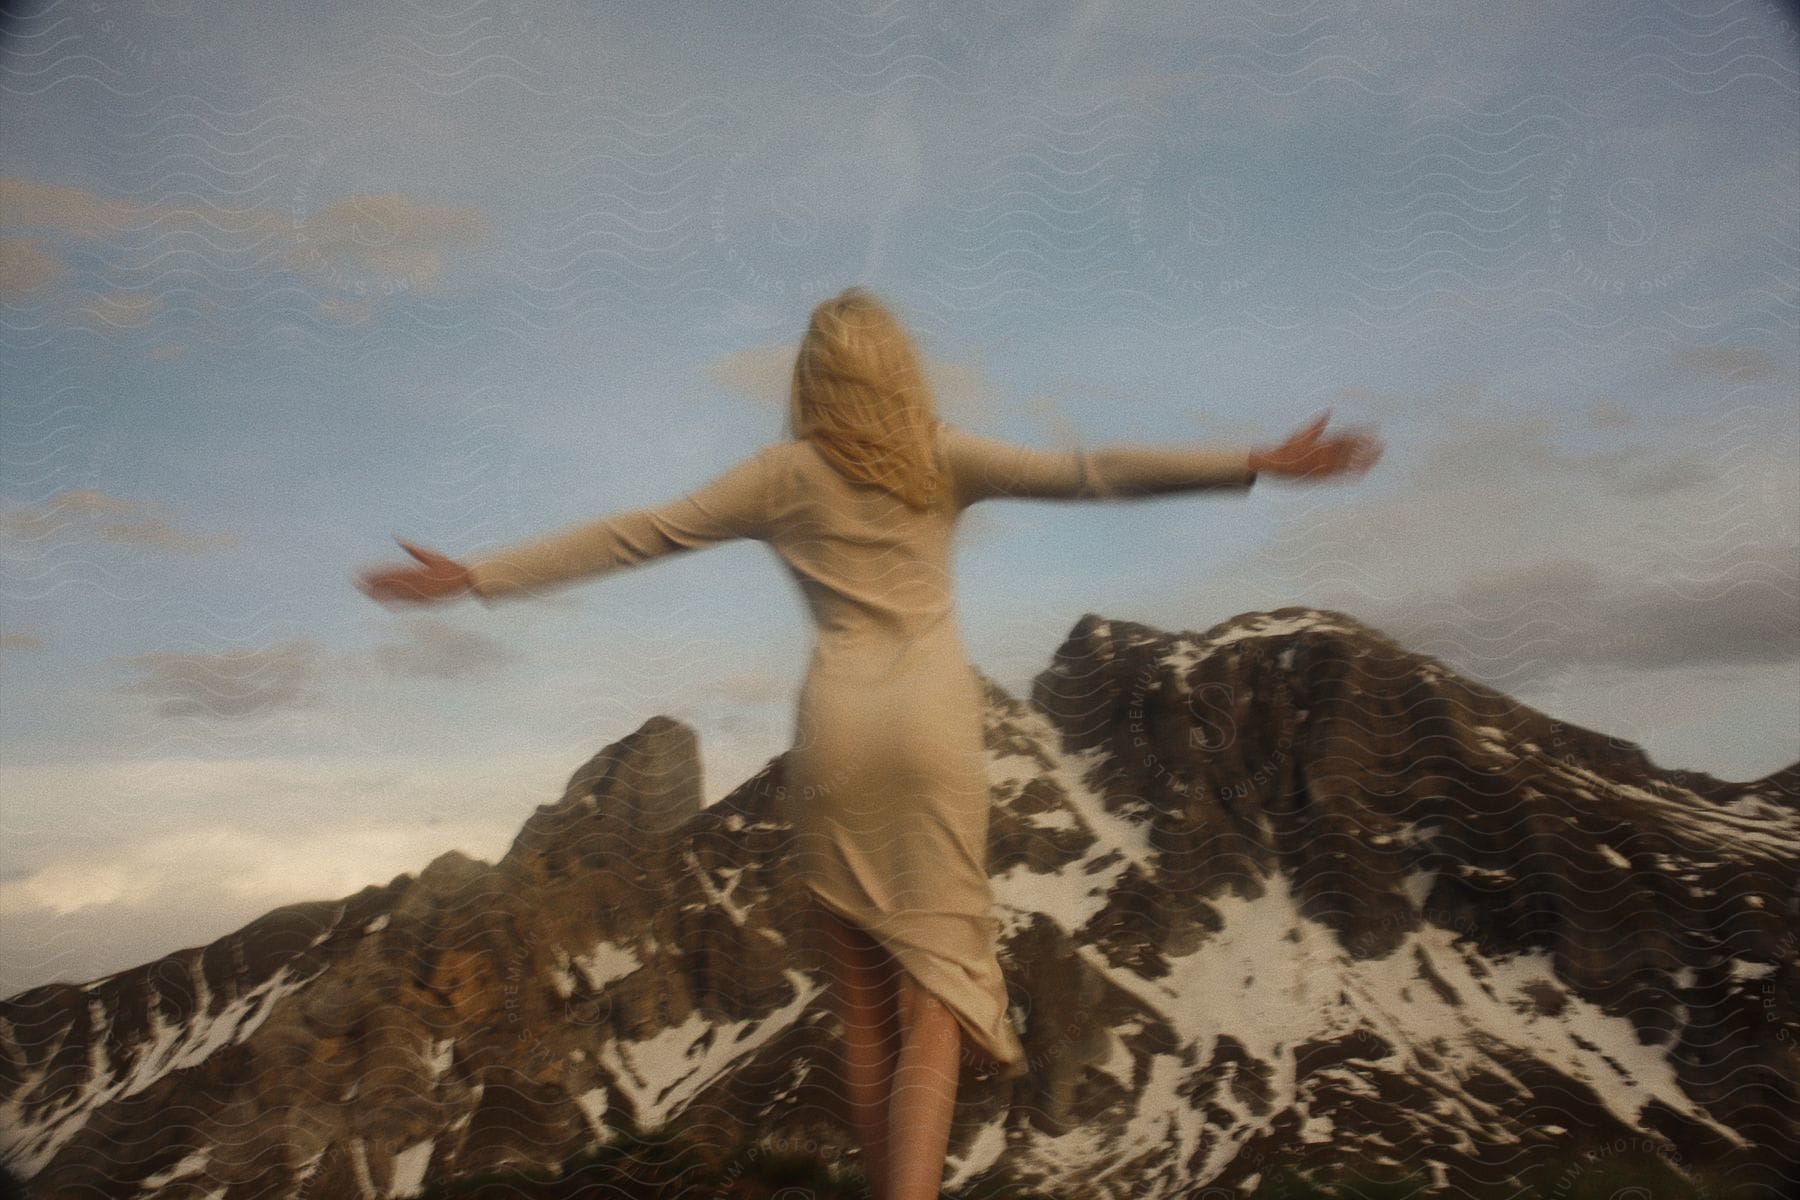 Blonde model in beige dress with outstretched arms in front of snowy mountain peak under dusky sky